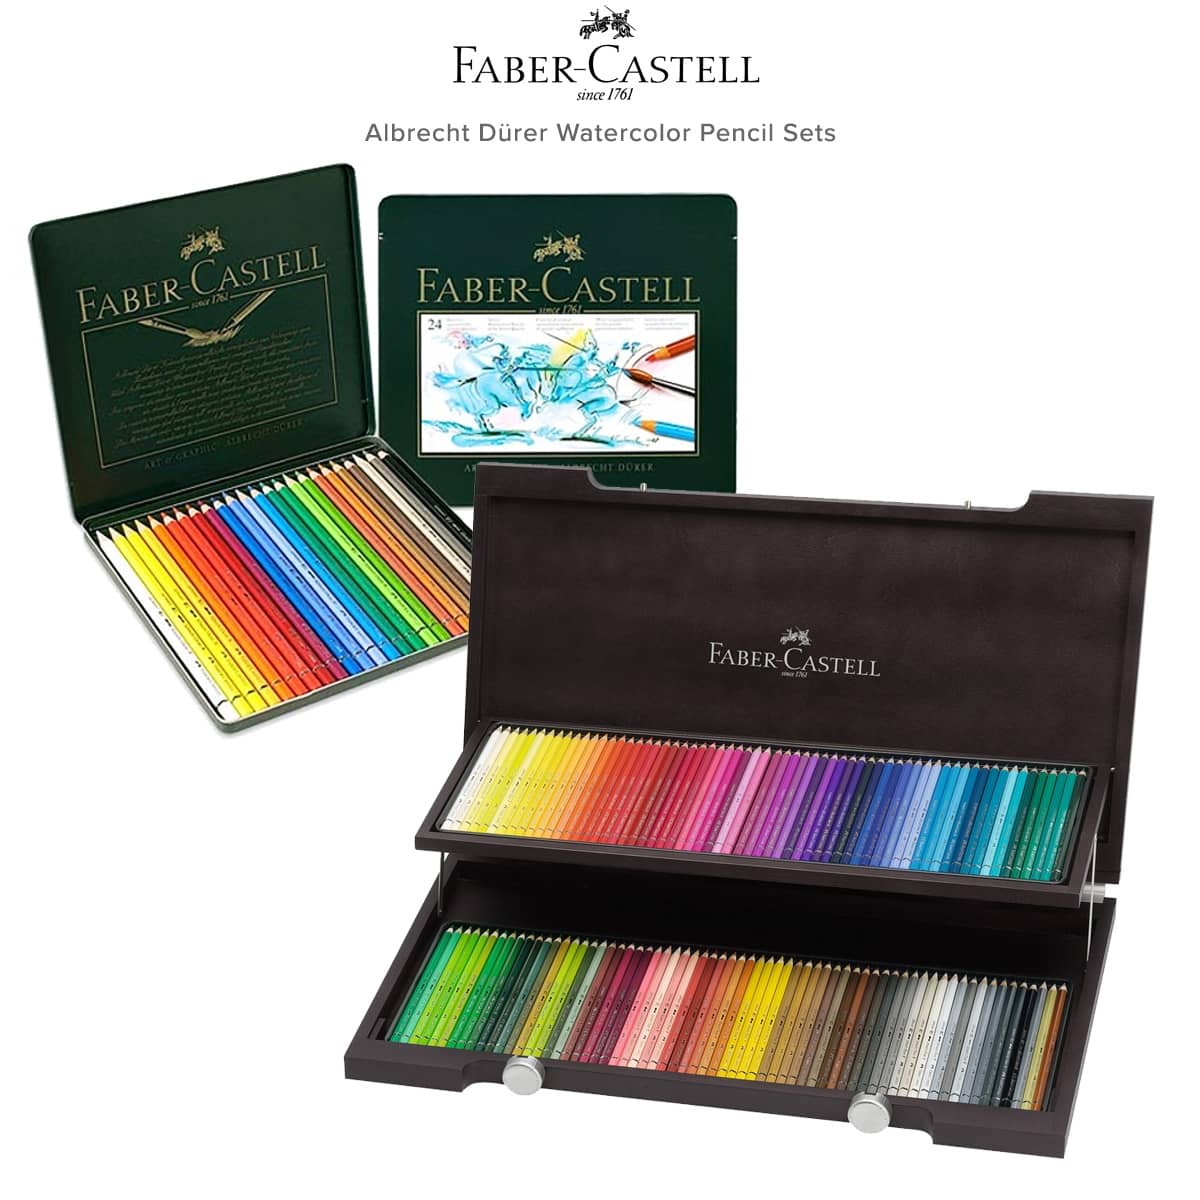 Faber-Castell Art on The Go Watercolor Pencils Set - Travel Watercolor Kit  with 10 Goldfaber Watercolor Pencils, Pencil Pouch, No Mess Sharpener and